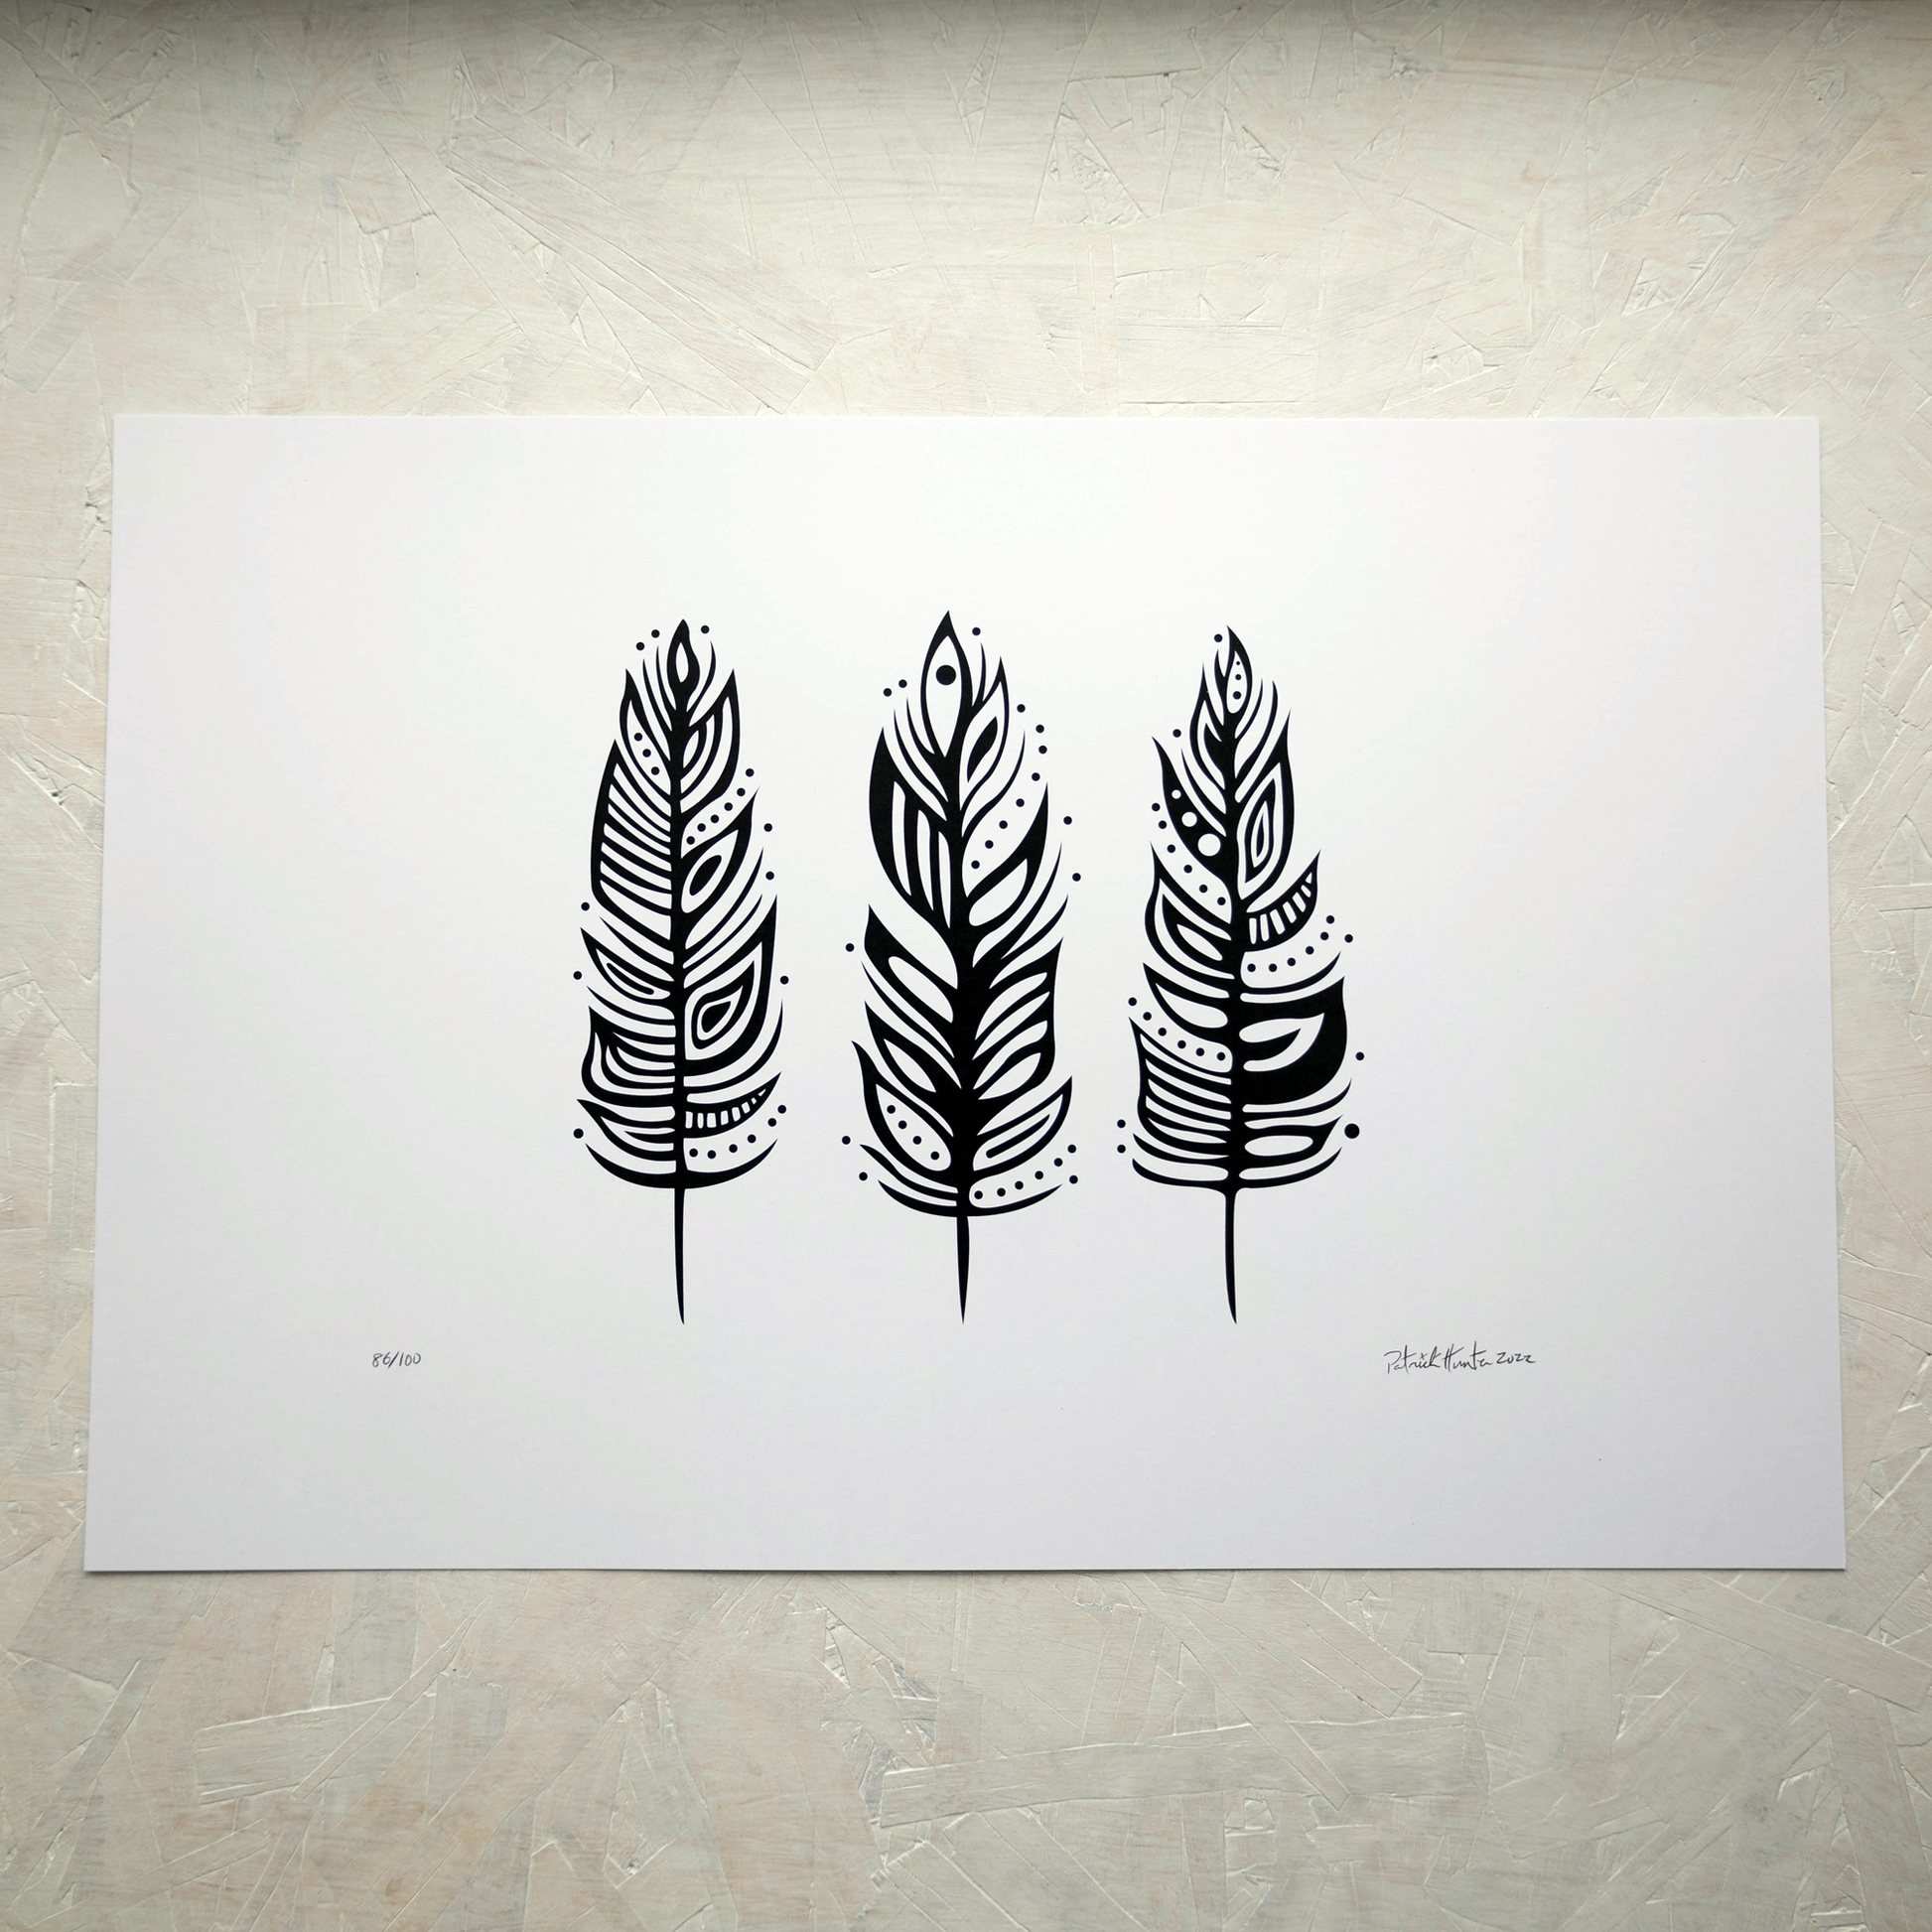 Print of Patrick Hunter's painting of three feathers, black on white, woodland art style.